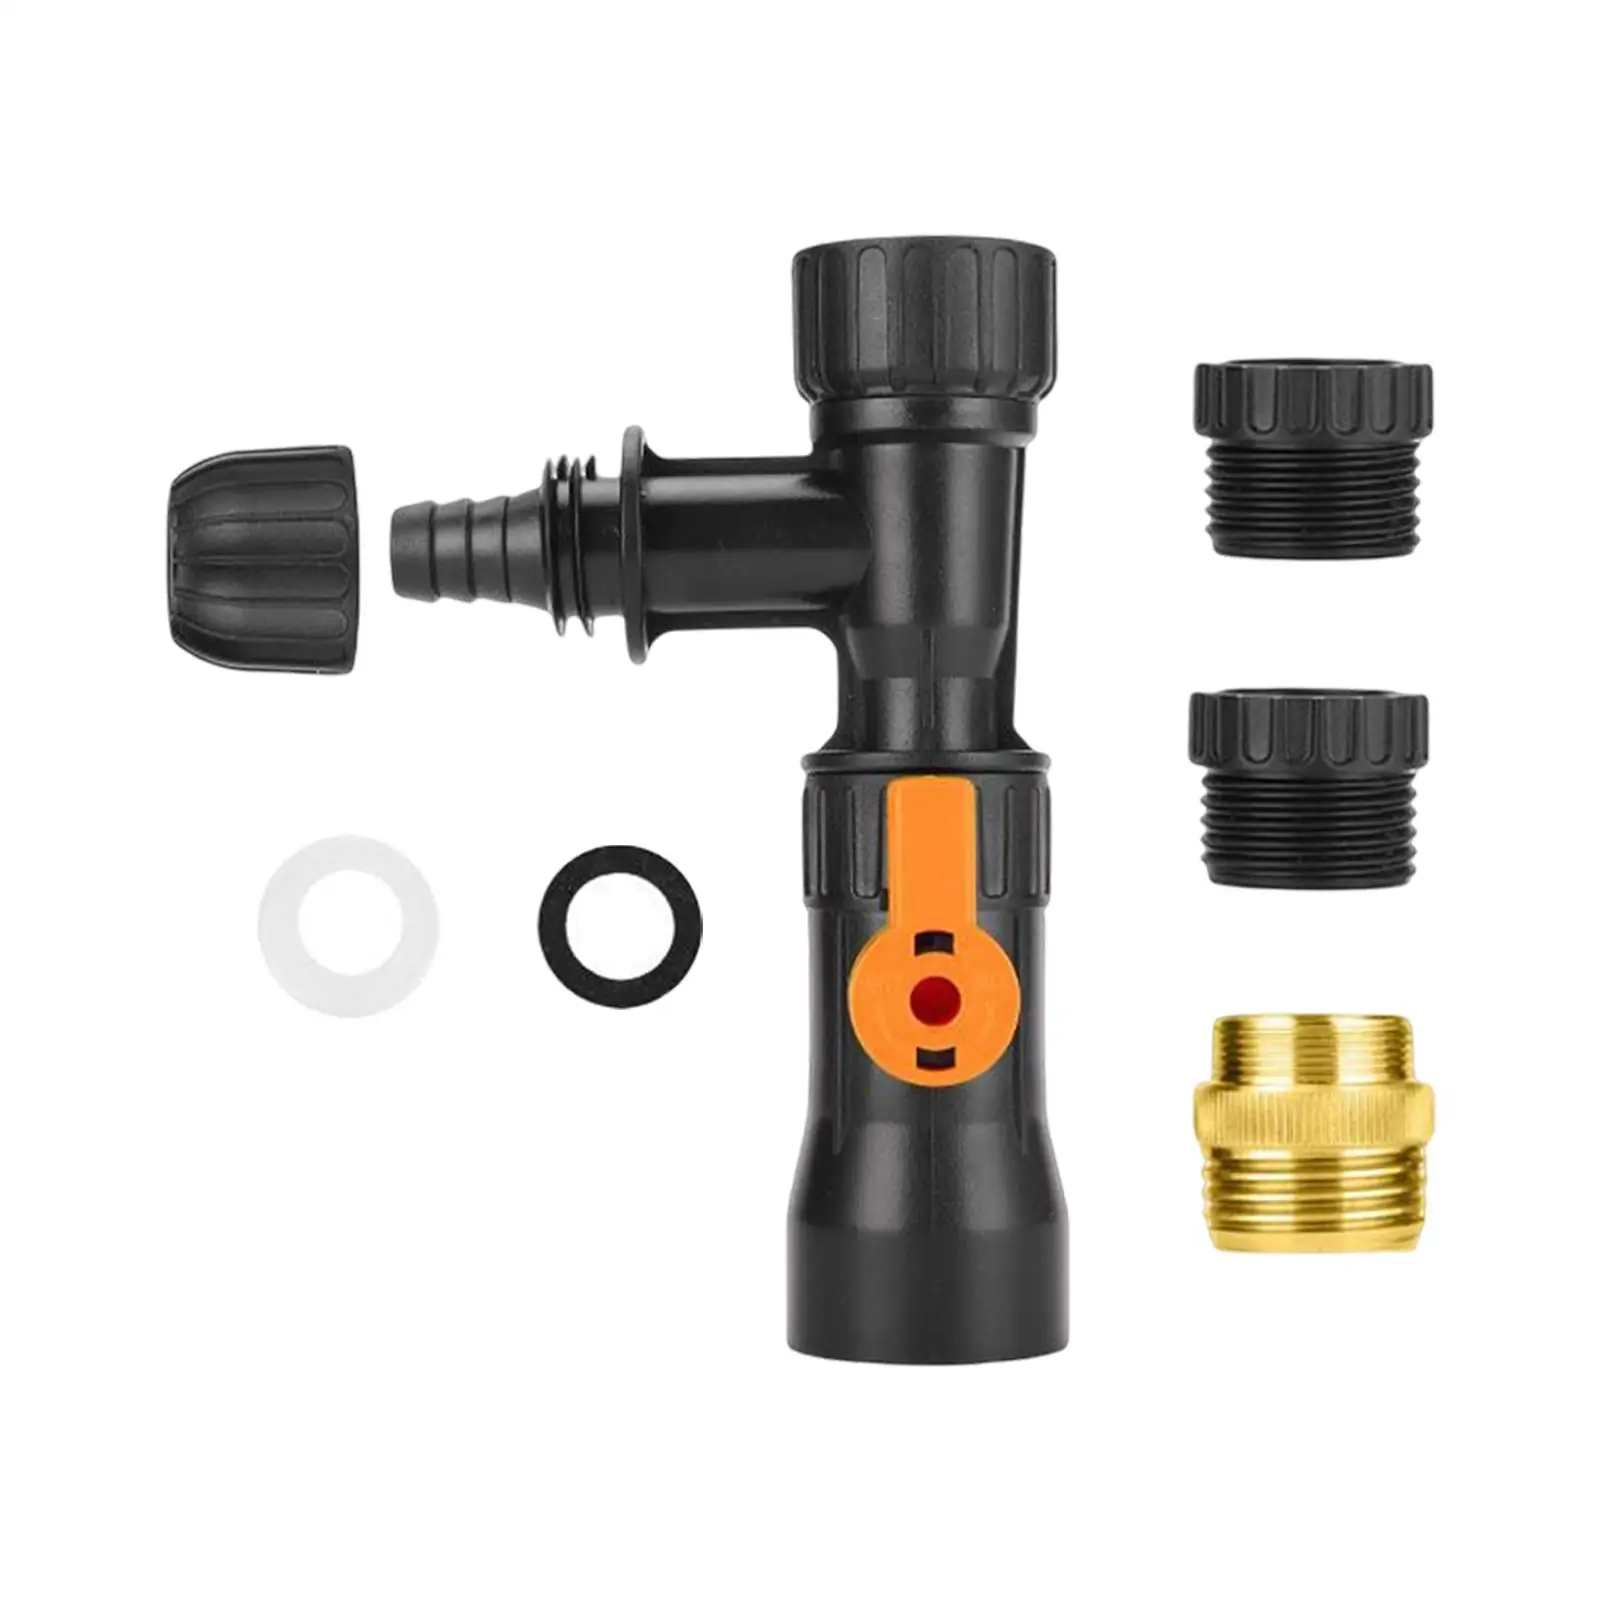 Water Changer Kit Water Exchanger Pump Replacement Parts Faucet Nozzles Connectors Faucet Type Water Changer Fish Tank Cleaning